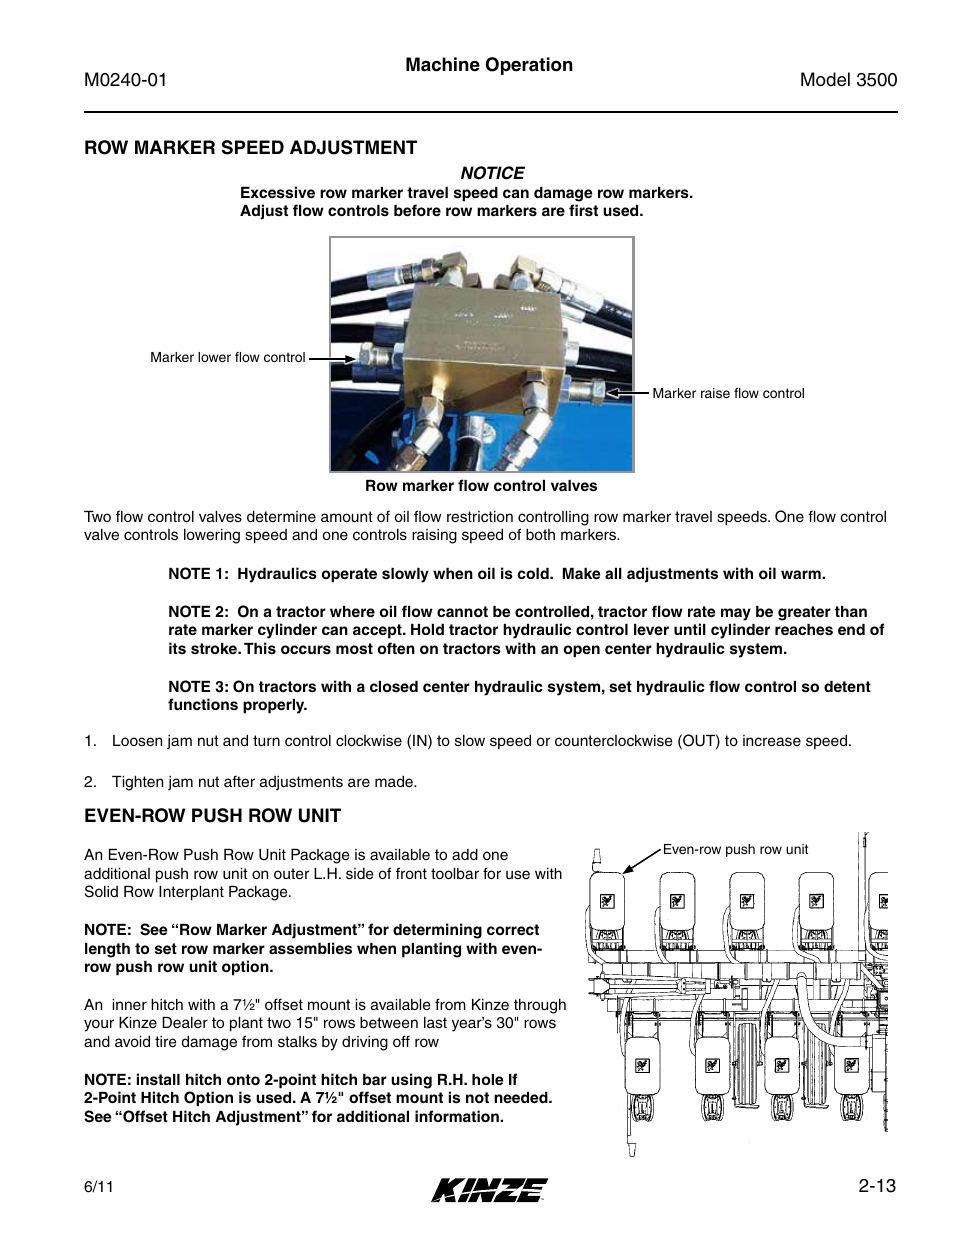 Row marker speed adjustment, Even-row push row unit, Row marker speed adjustment -13 | Even-row push row unit -13 | Kinze 3500 Lift and Rotate Planter Rev. 7/14 User Manual | Page 25 / 140